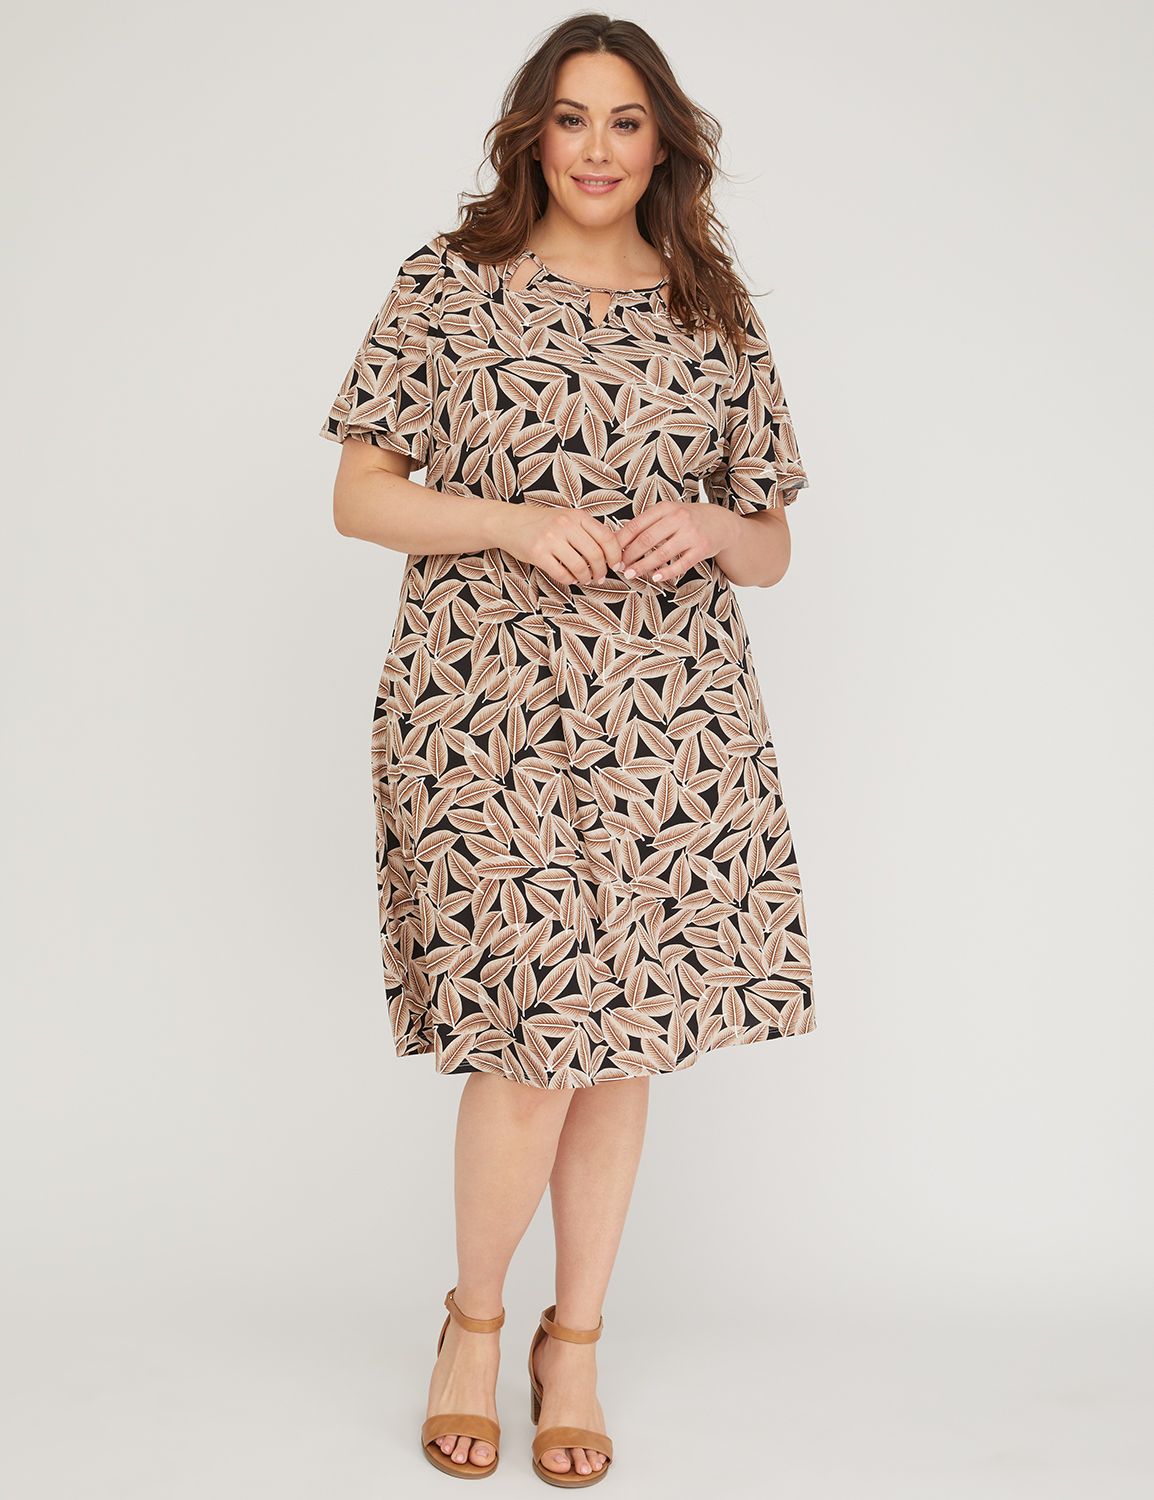 Plus Size Dresses & Gowns For Women | Catherines